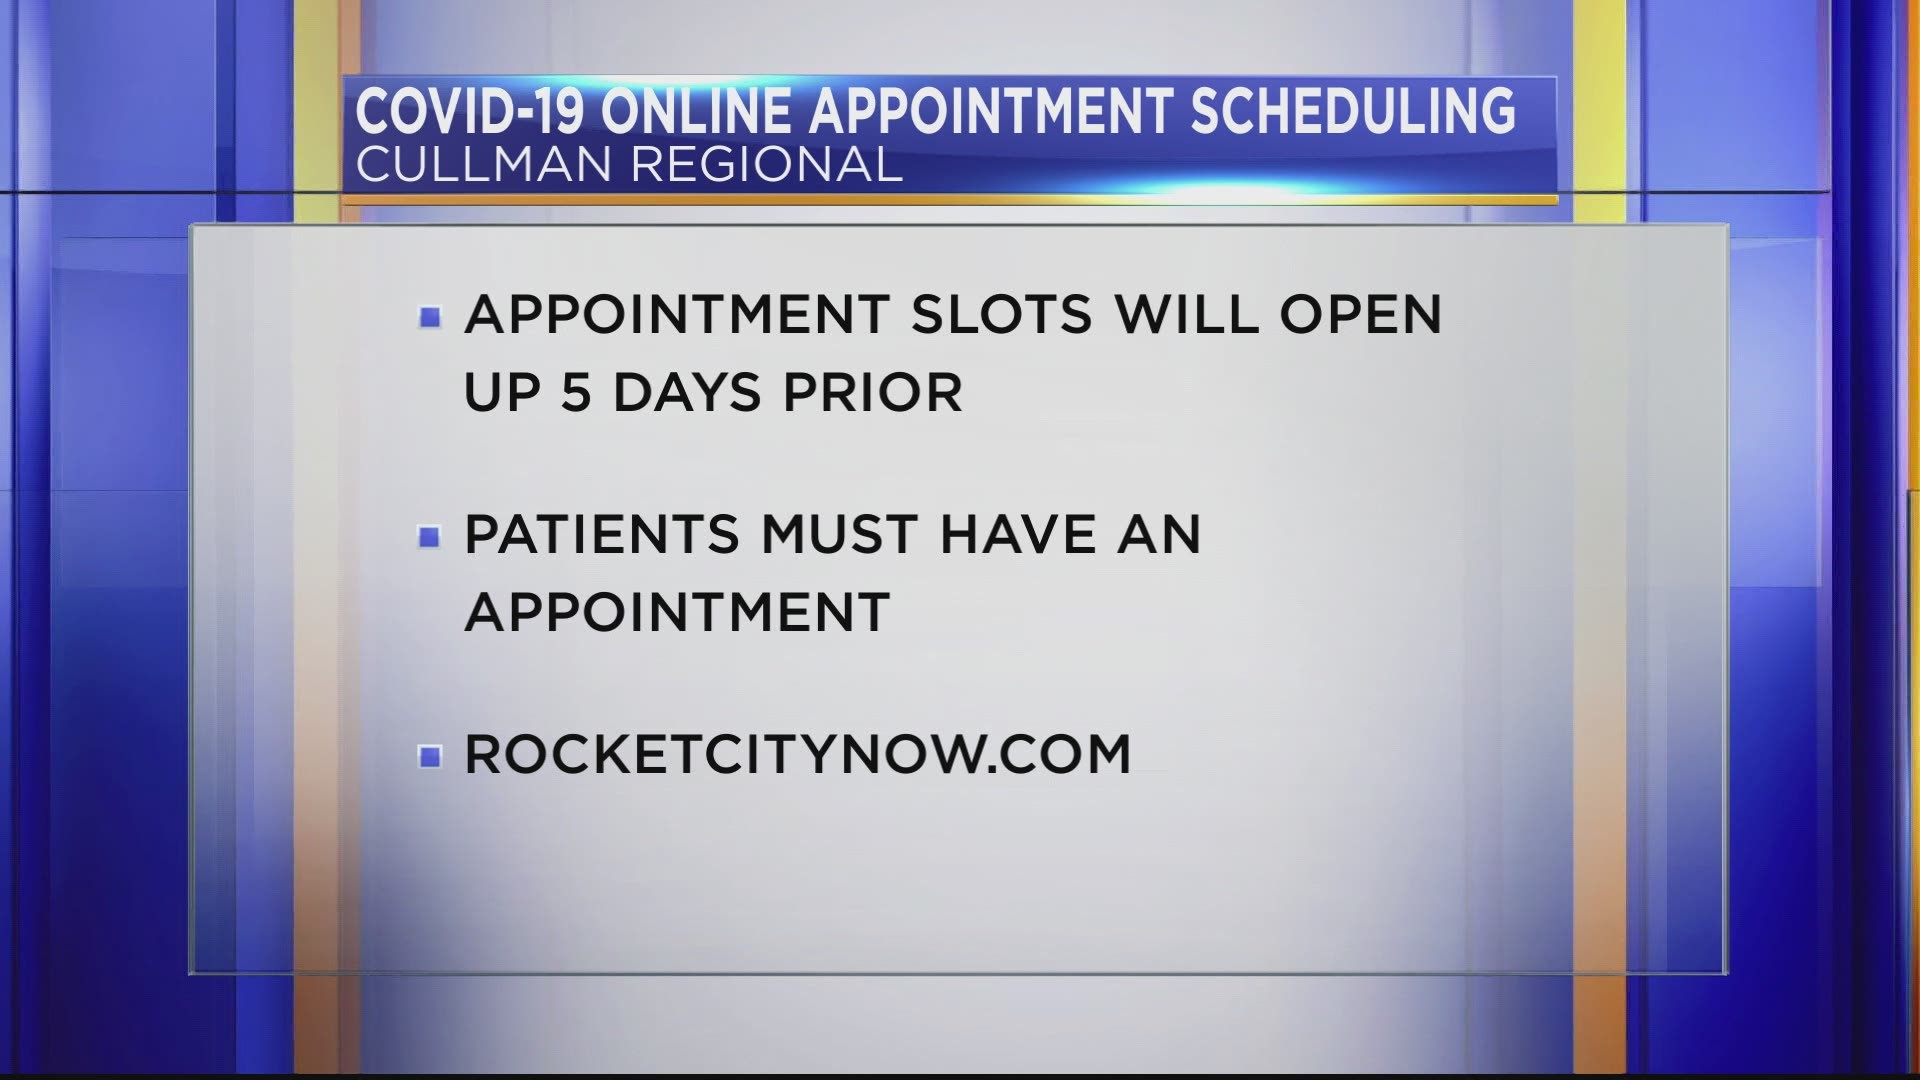 Based on Cullman Regional's vaccine allotment, appointment slots will open five days prior to the appointment date.